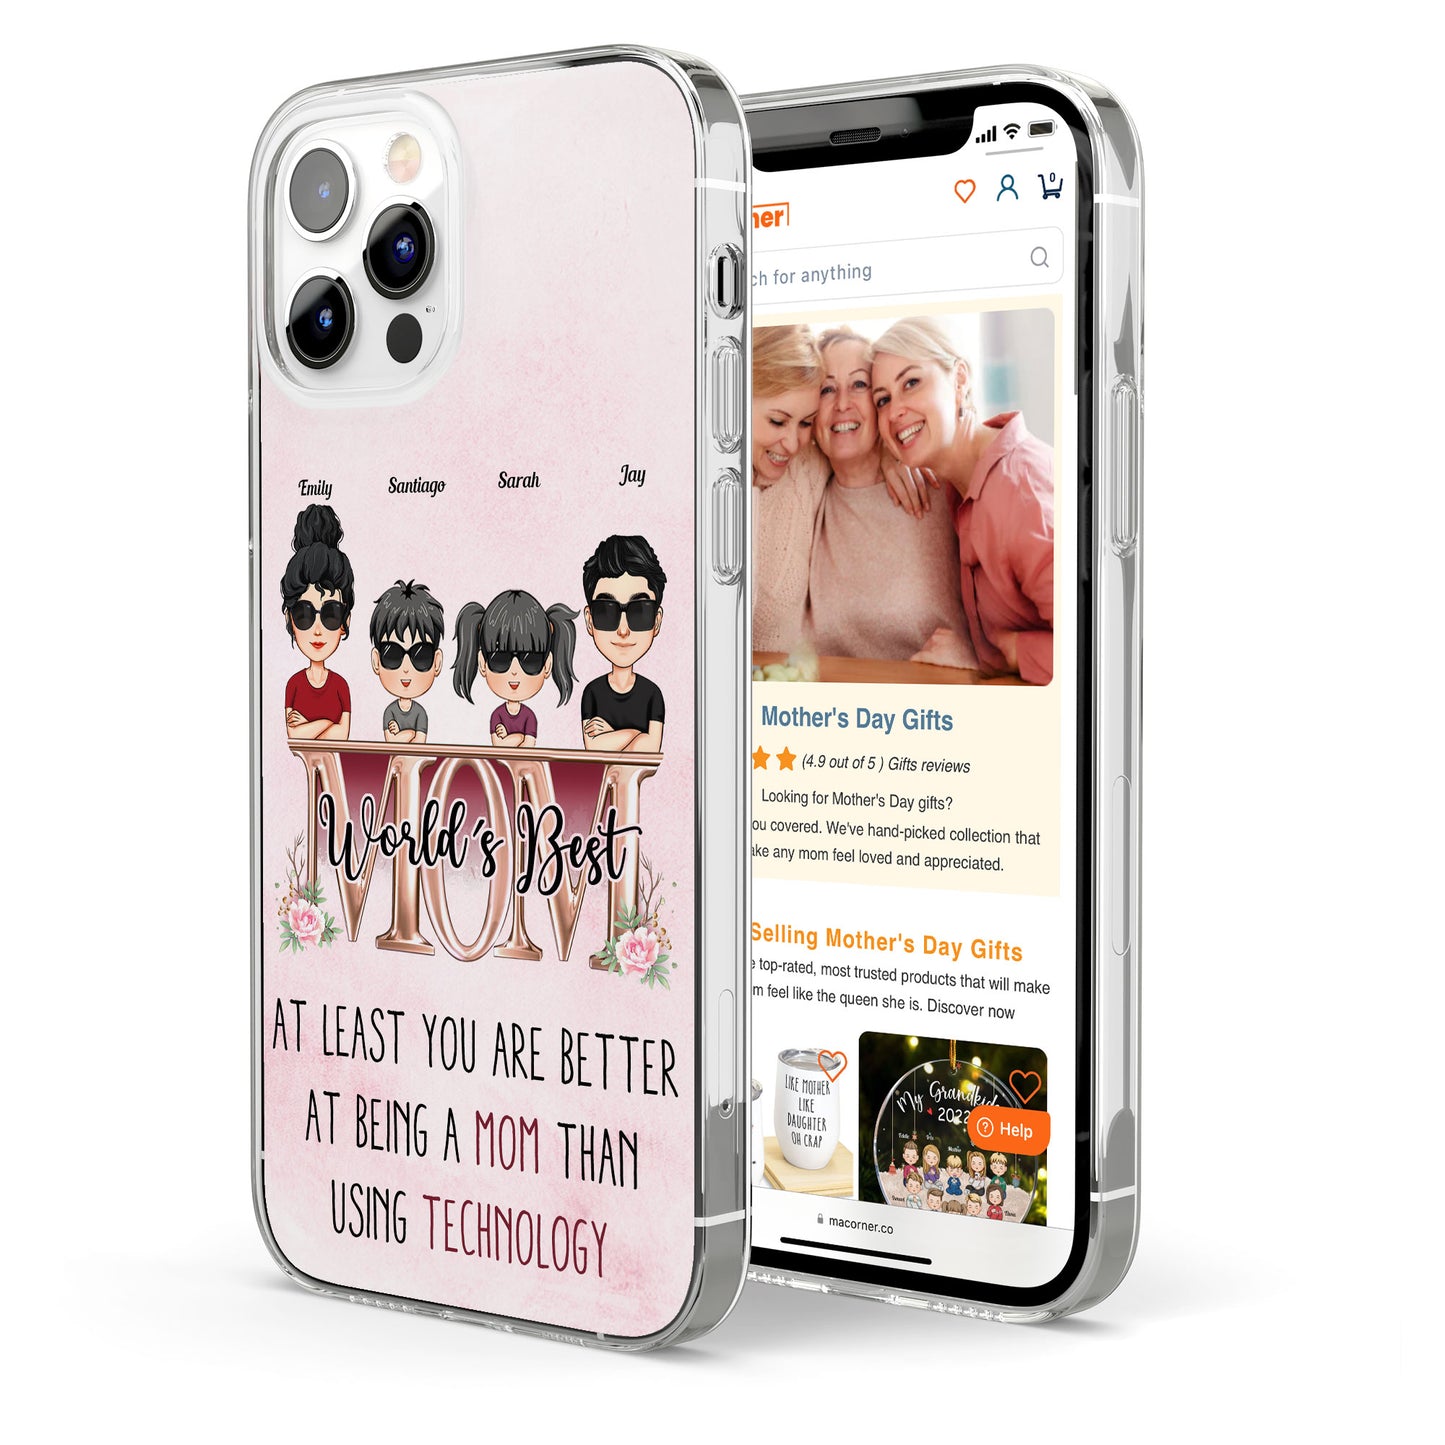 You Are Better At Being A Mom - Personalized Clear Phone Case